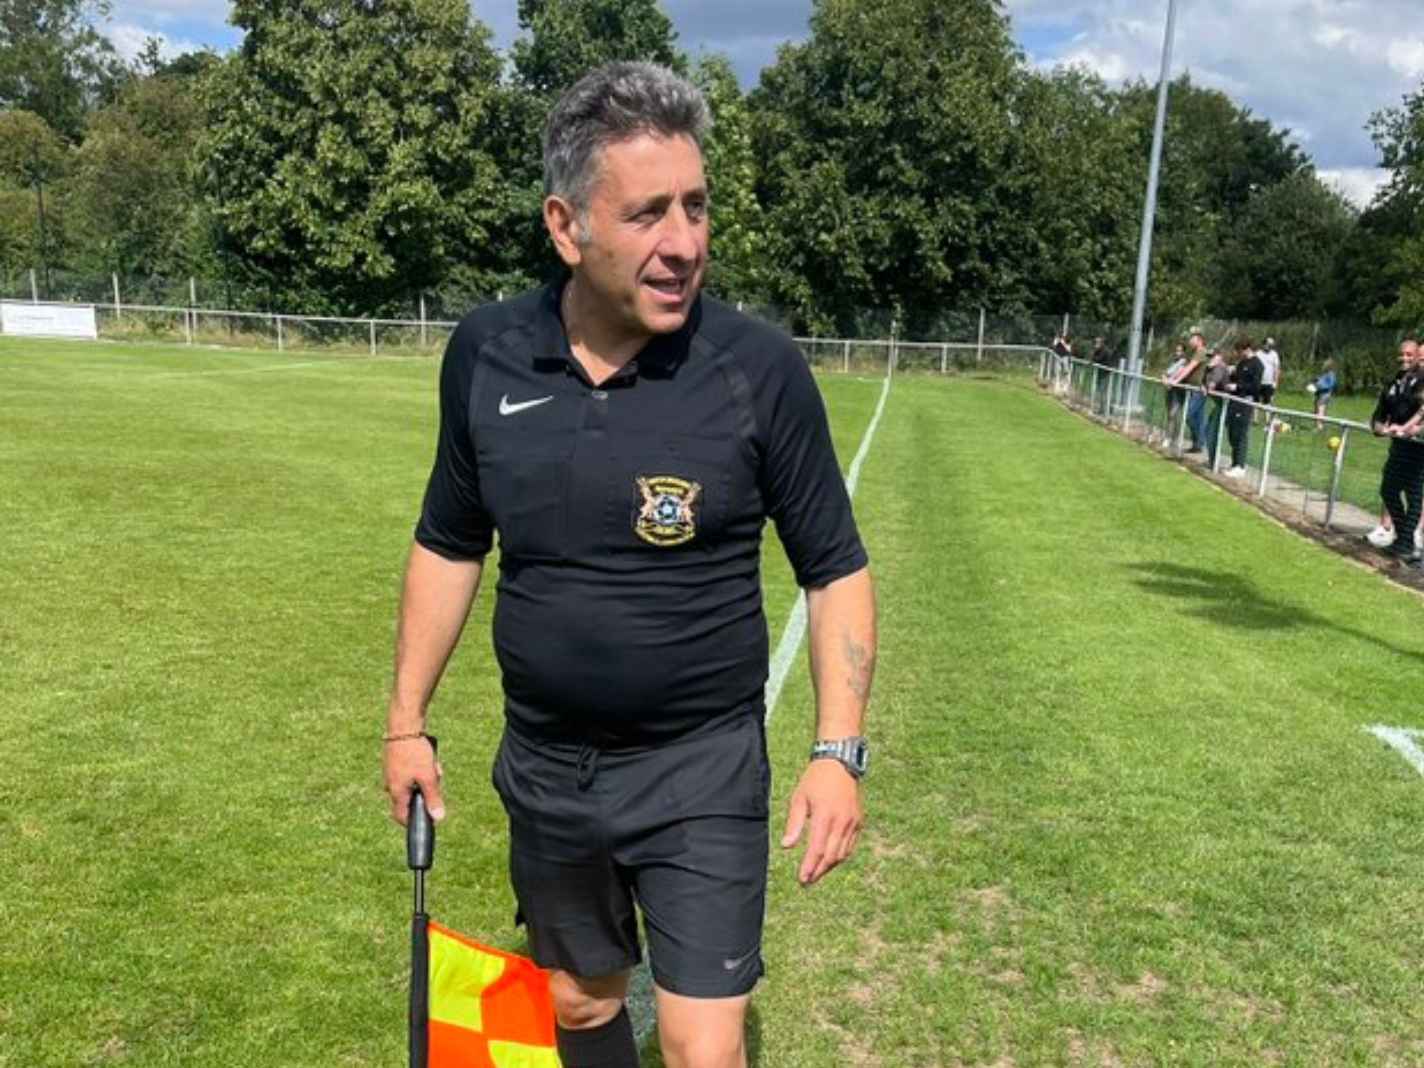 Sunday League Linesman Stuns Crowd with High-End Balenciaga Football Boots – Here’s What They Cost